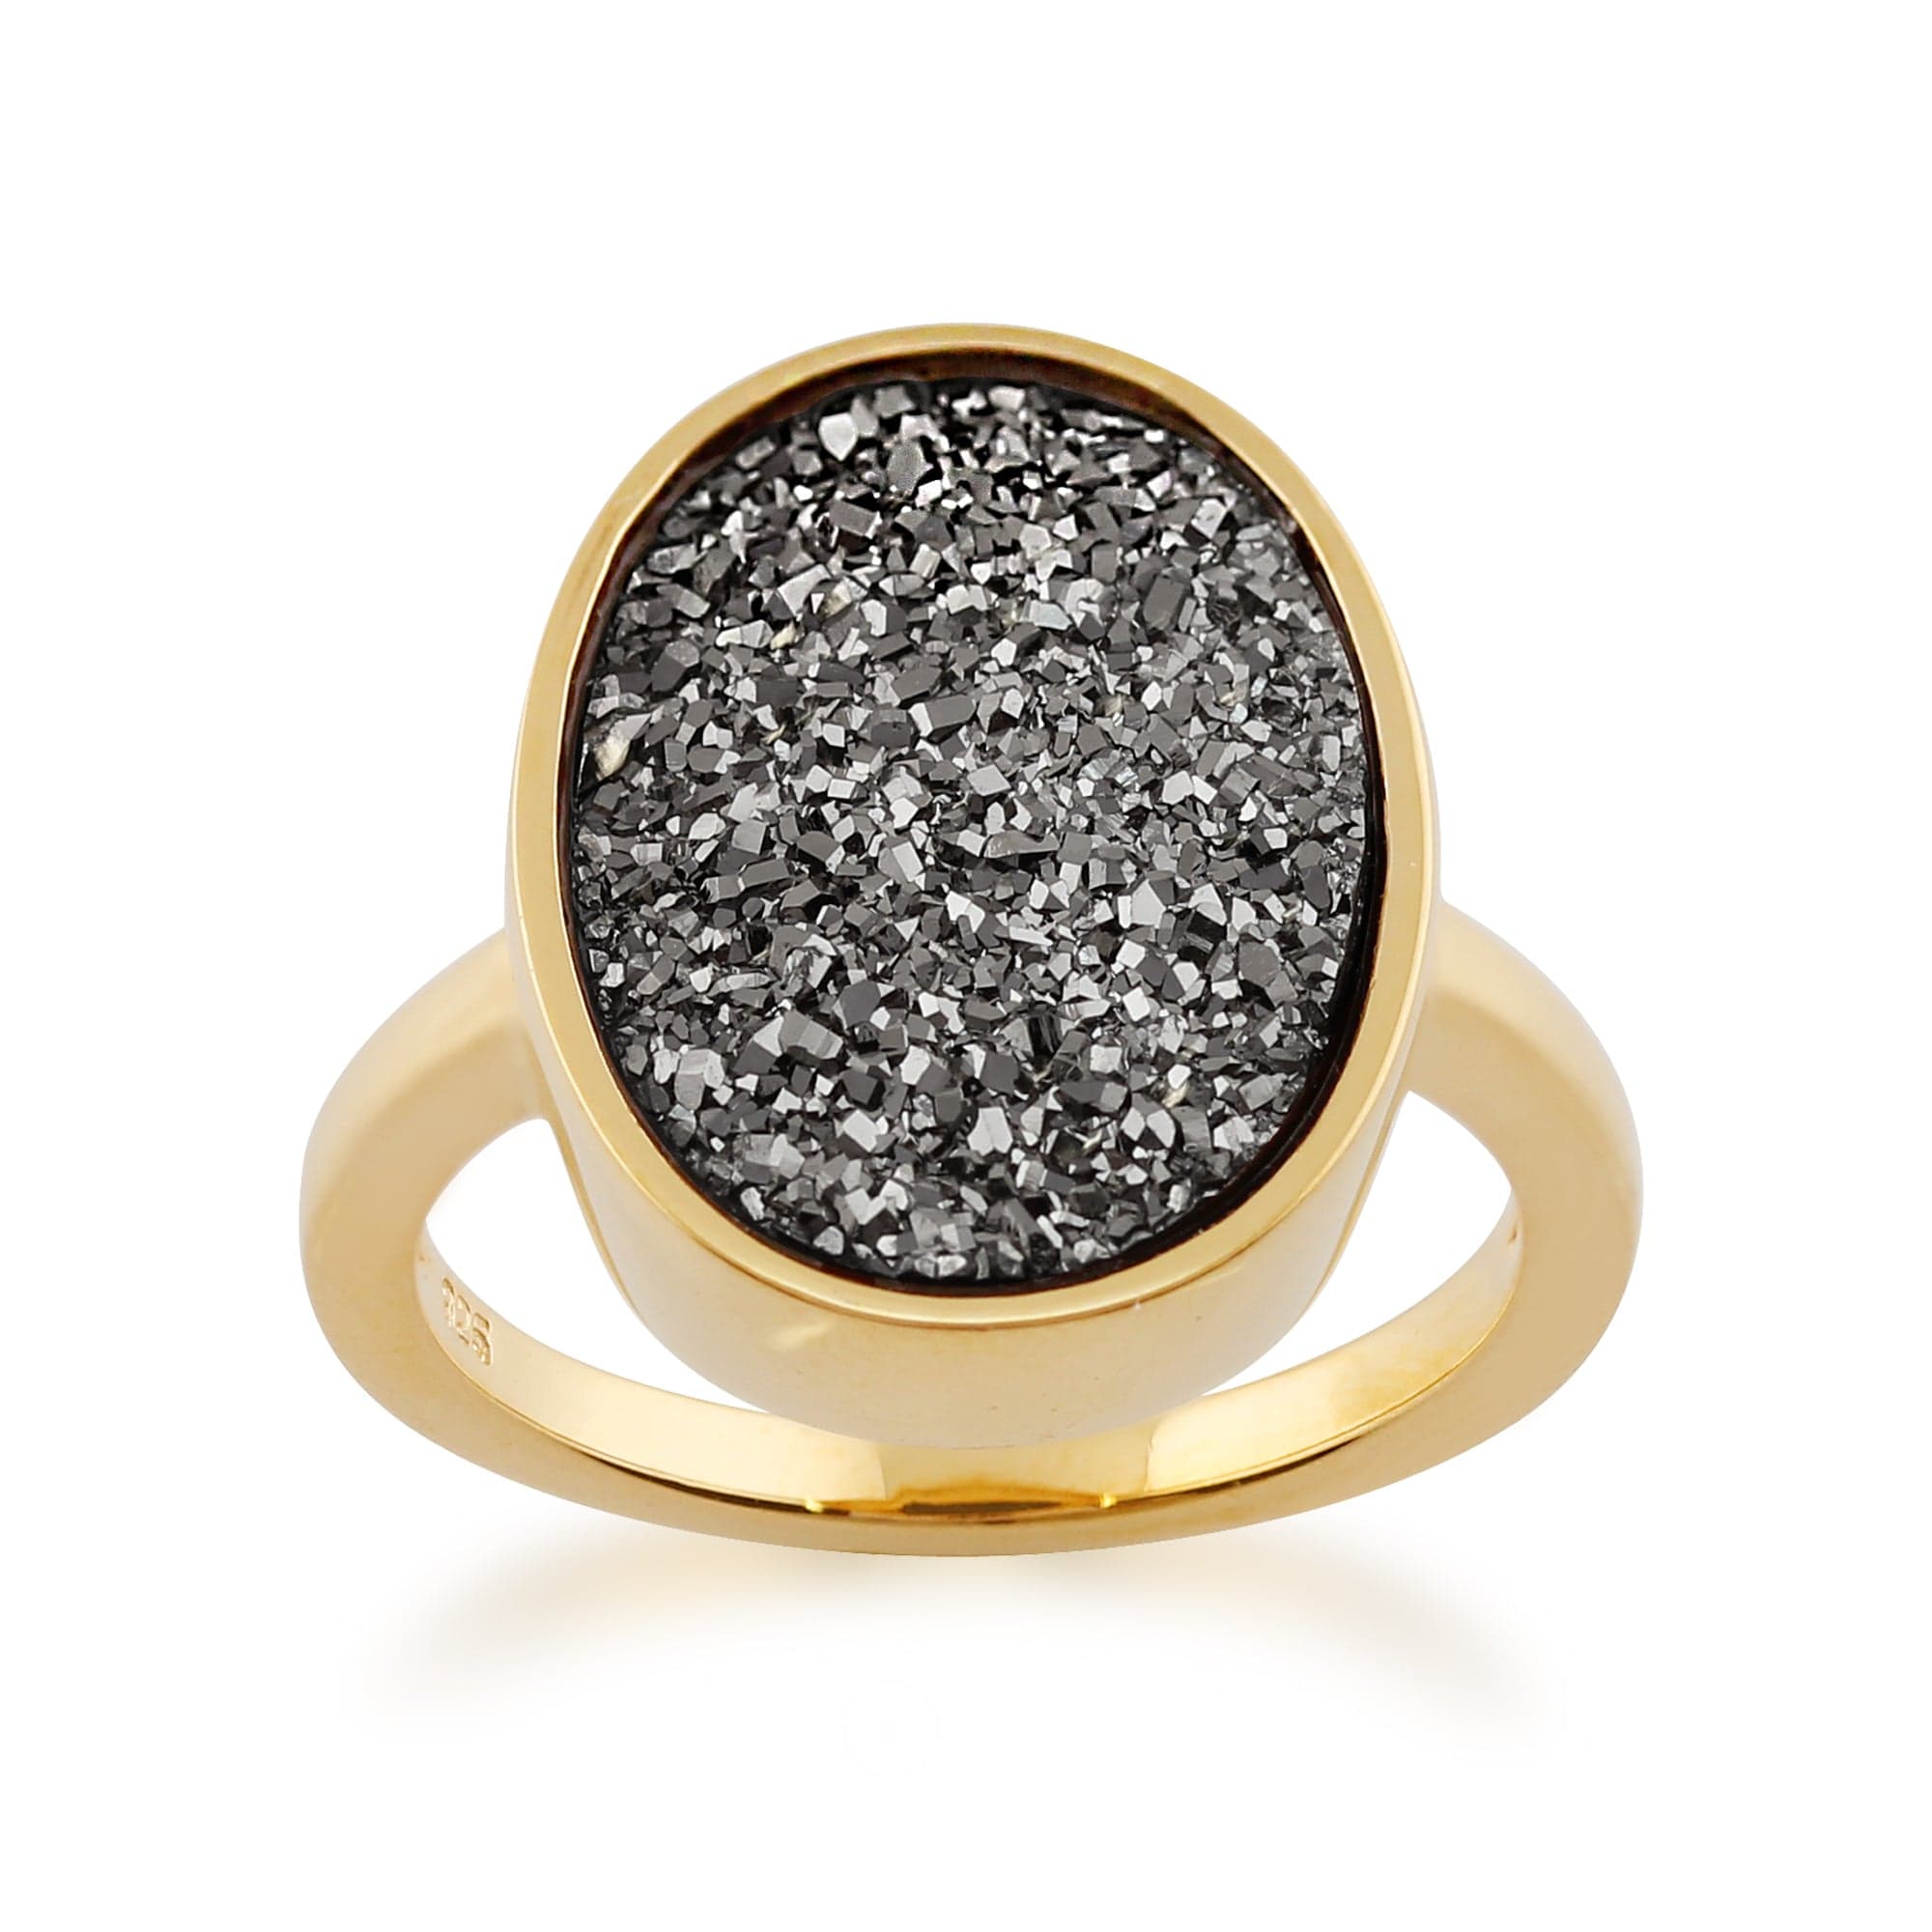 Gemondo 925 Gold Plated Sterling Silver 6.6ct Moon Silver Drusy Quartz Ring Image 1